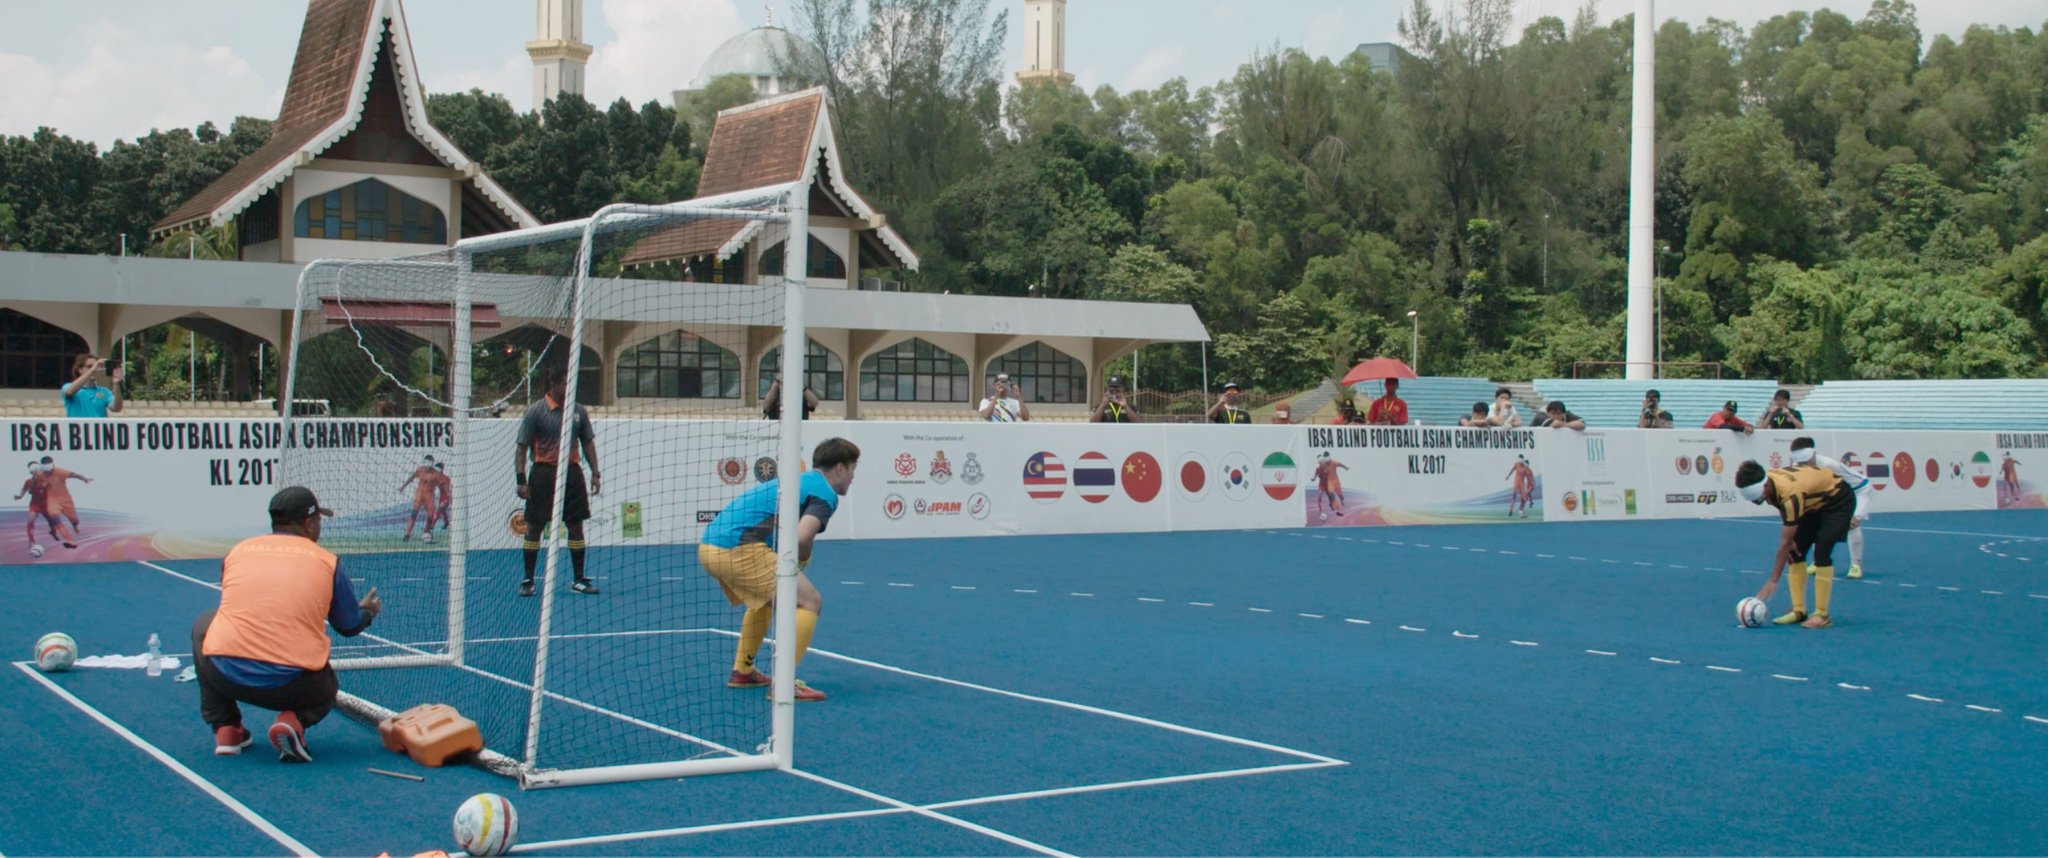 Blind footballer Pokyi prepares to take a penalty kick against South Korea during the IBSA Blind Football Asian Championships.